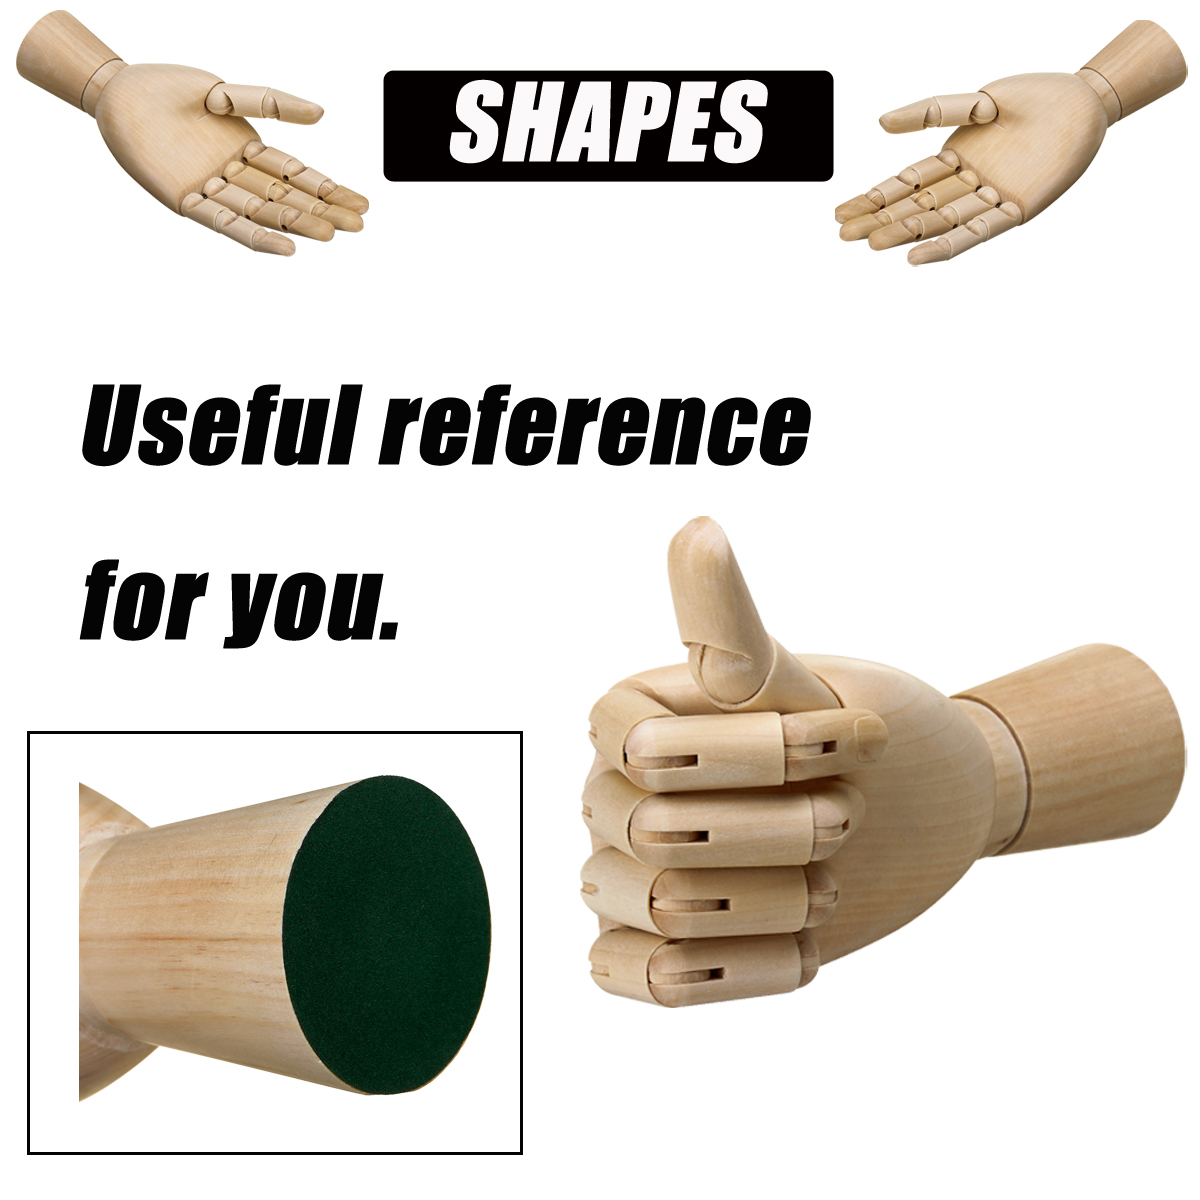 781012-Inch-Wooden-Hand-Body-Artist-Medical-Model-Flexible-Jointed-Wood-Sculpture-DIY-Education-1322443-1